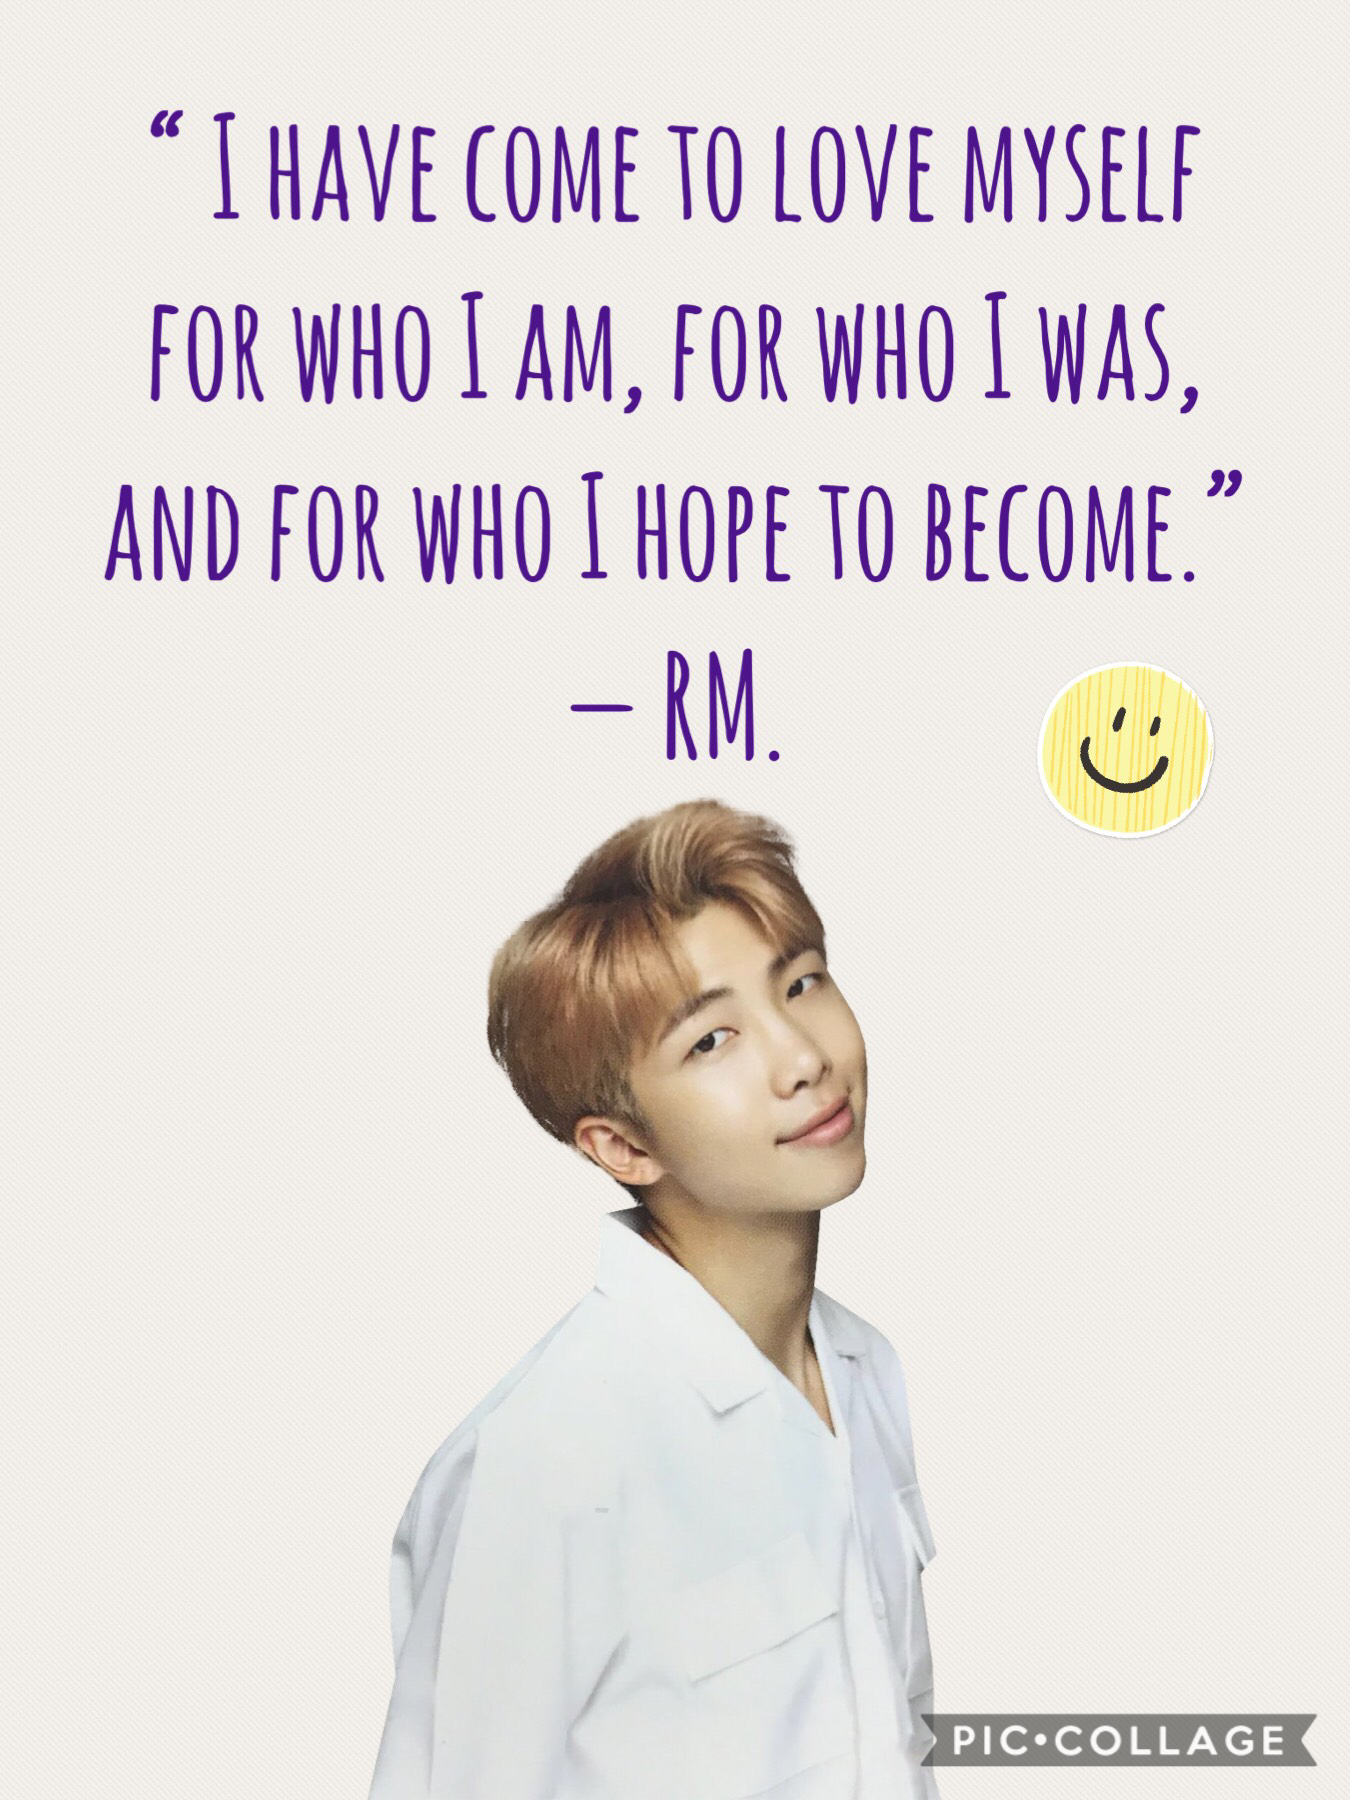 Positve quote by the one and only RM!